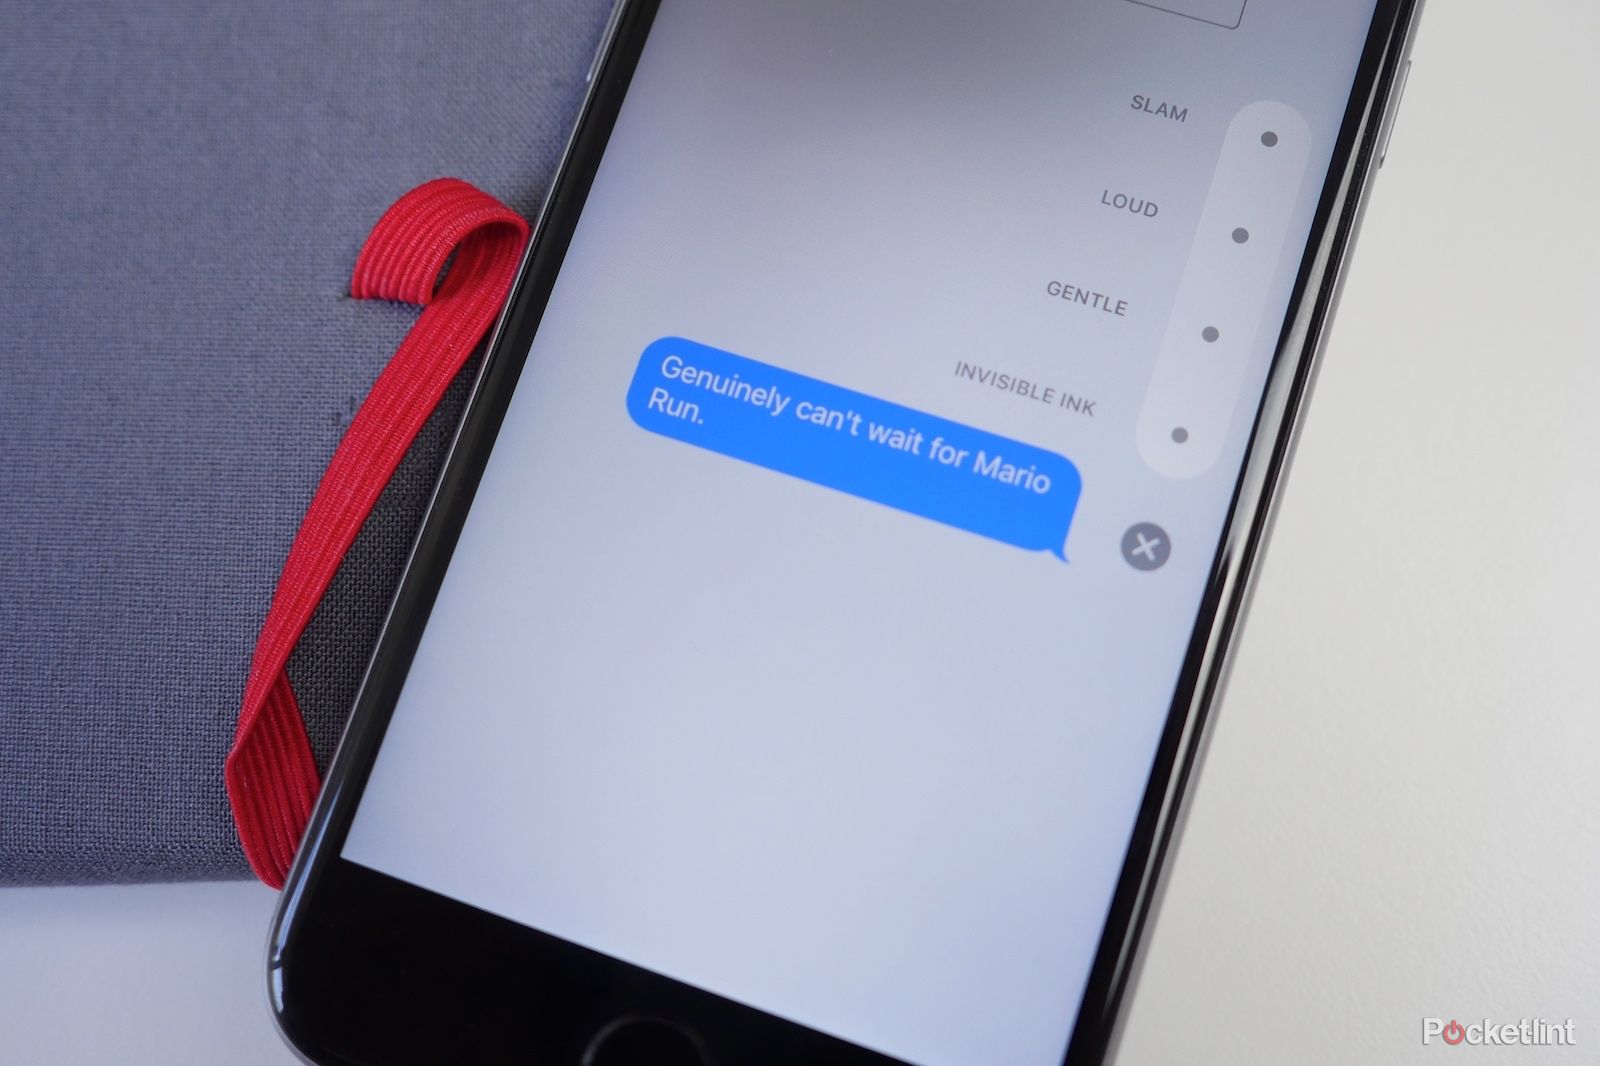 ios 10 messages explained what s new and how to use it image 3